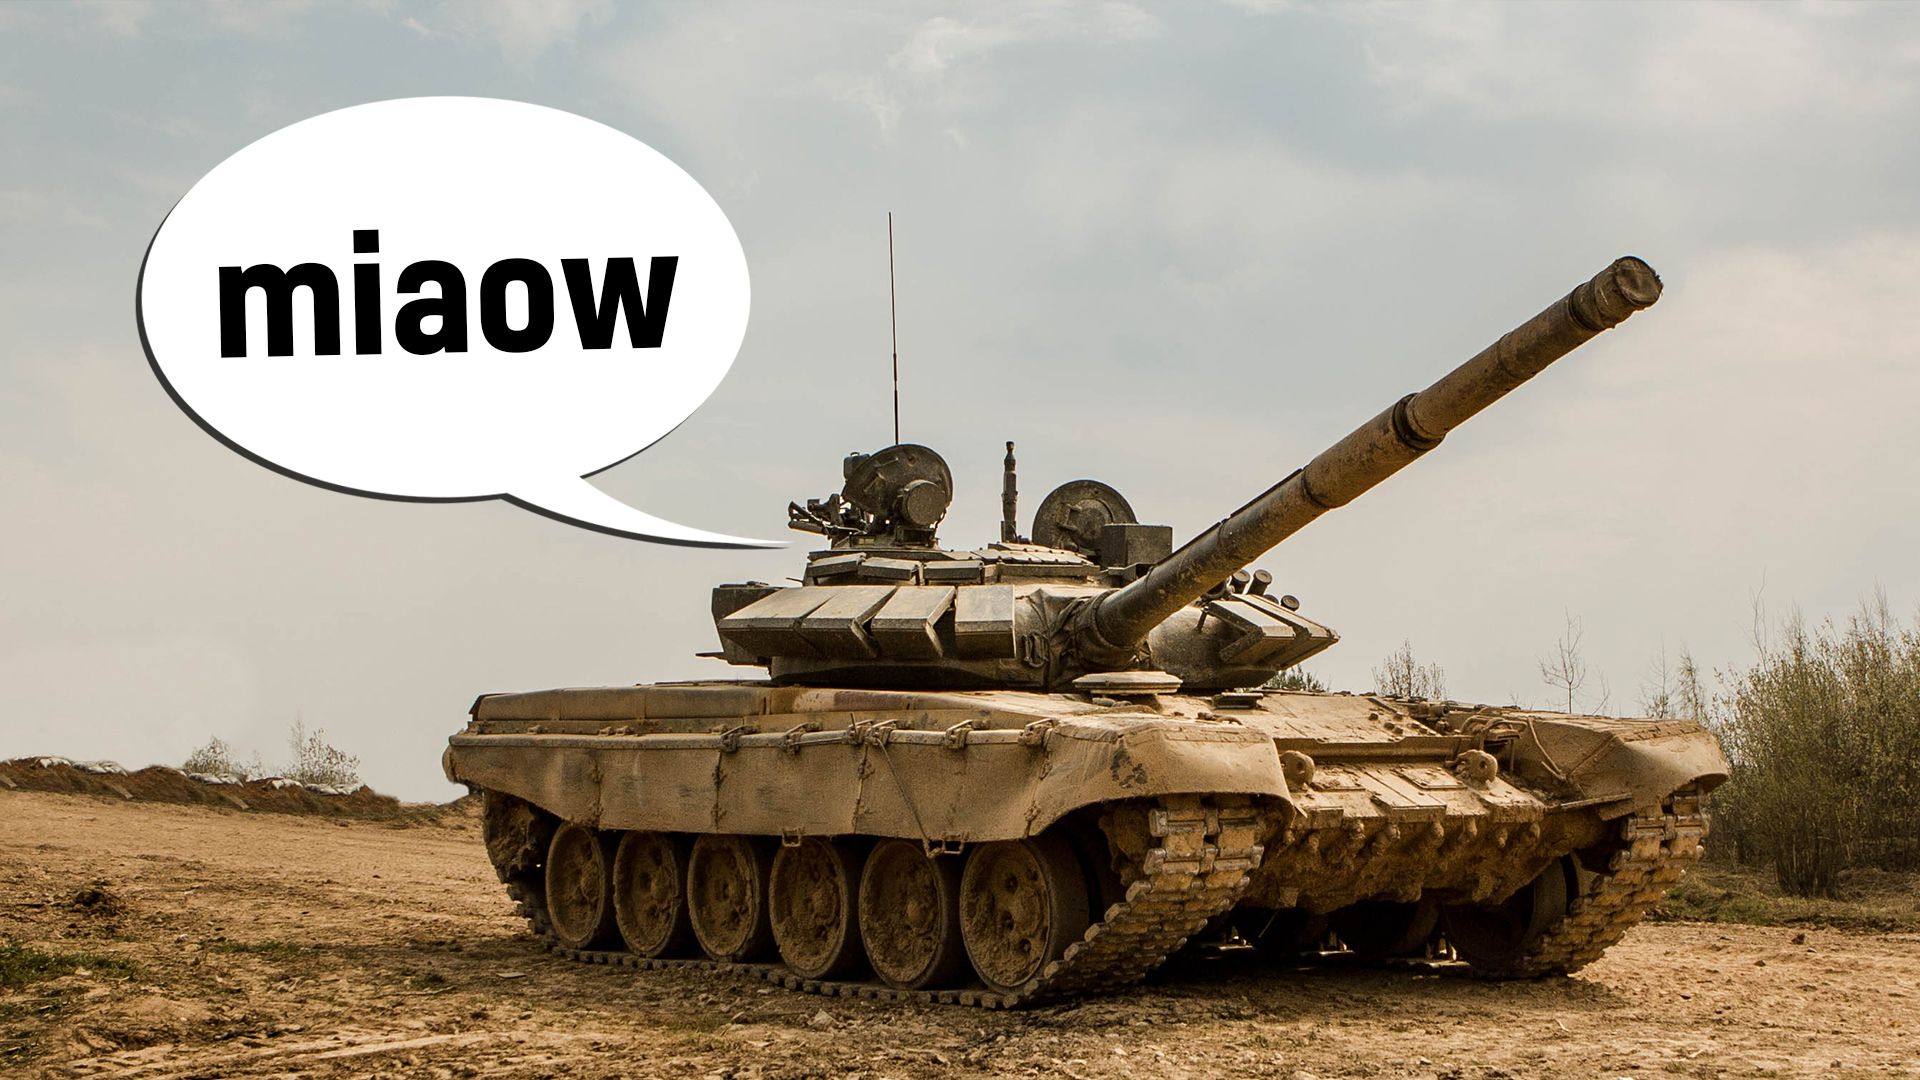 A tank with a speech bubble that says "miaow"